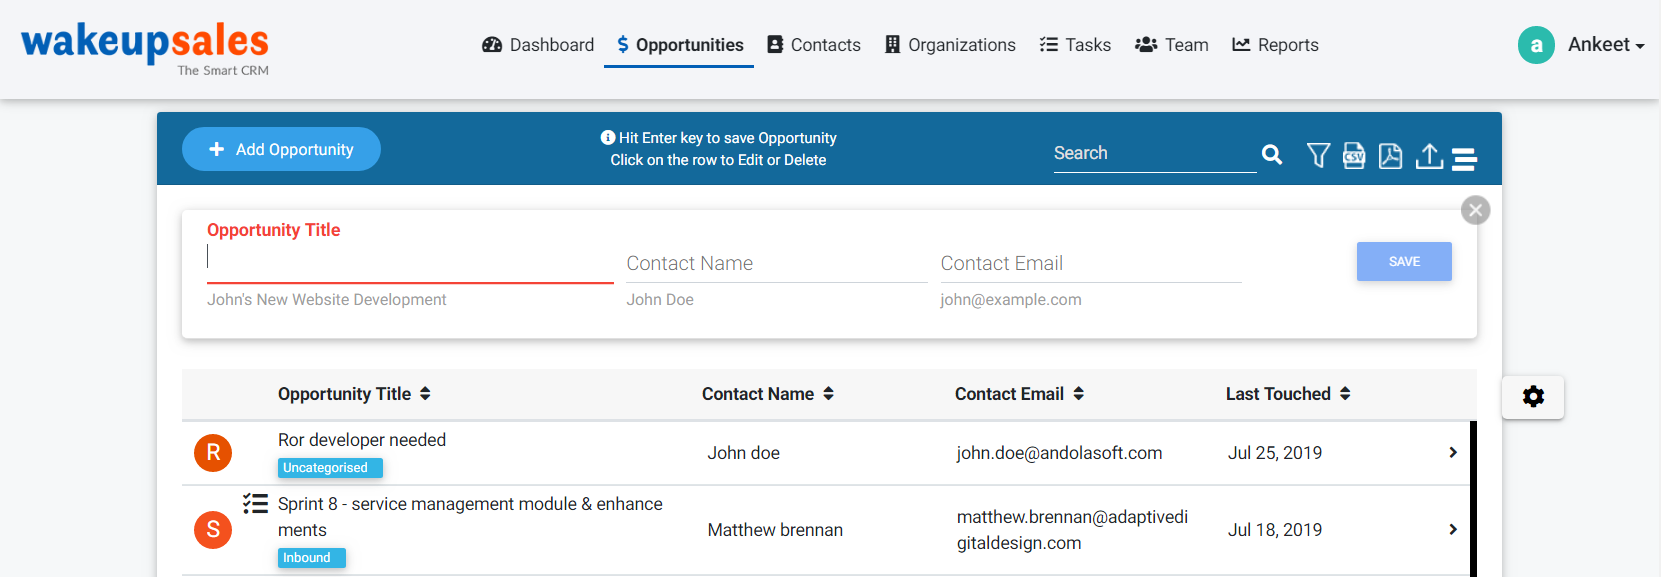 Image NameHow To Crank Up Your Sales With Wakeupsales CRM